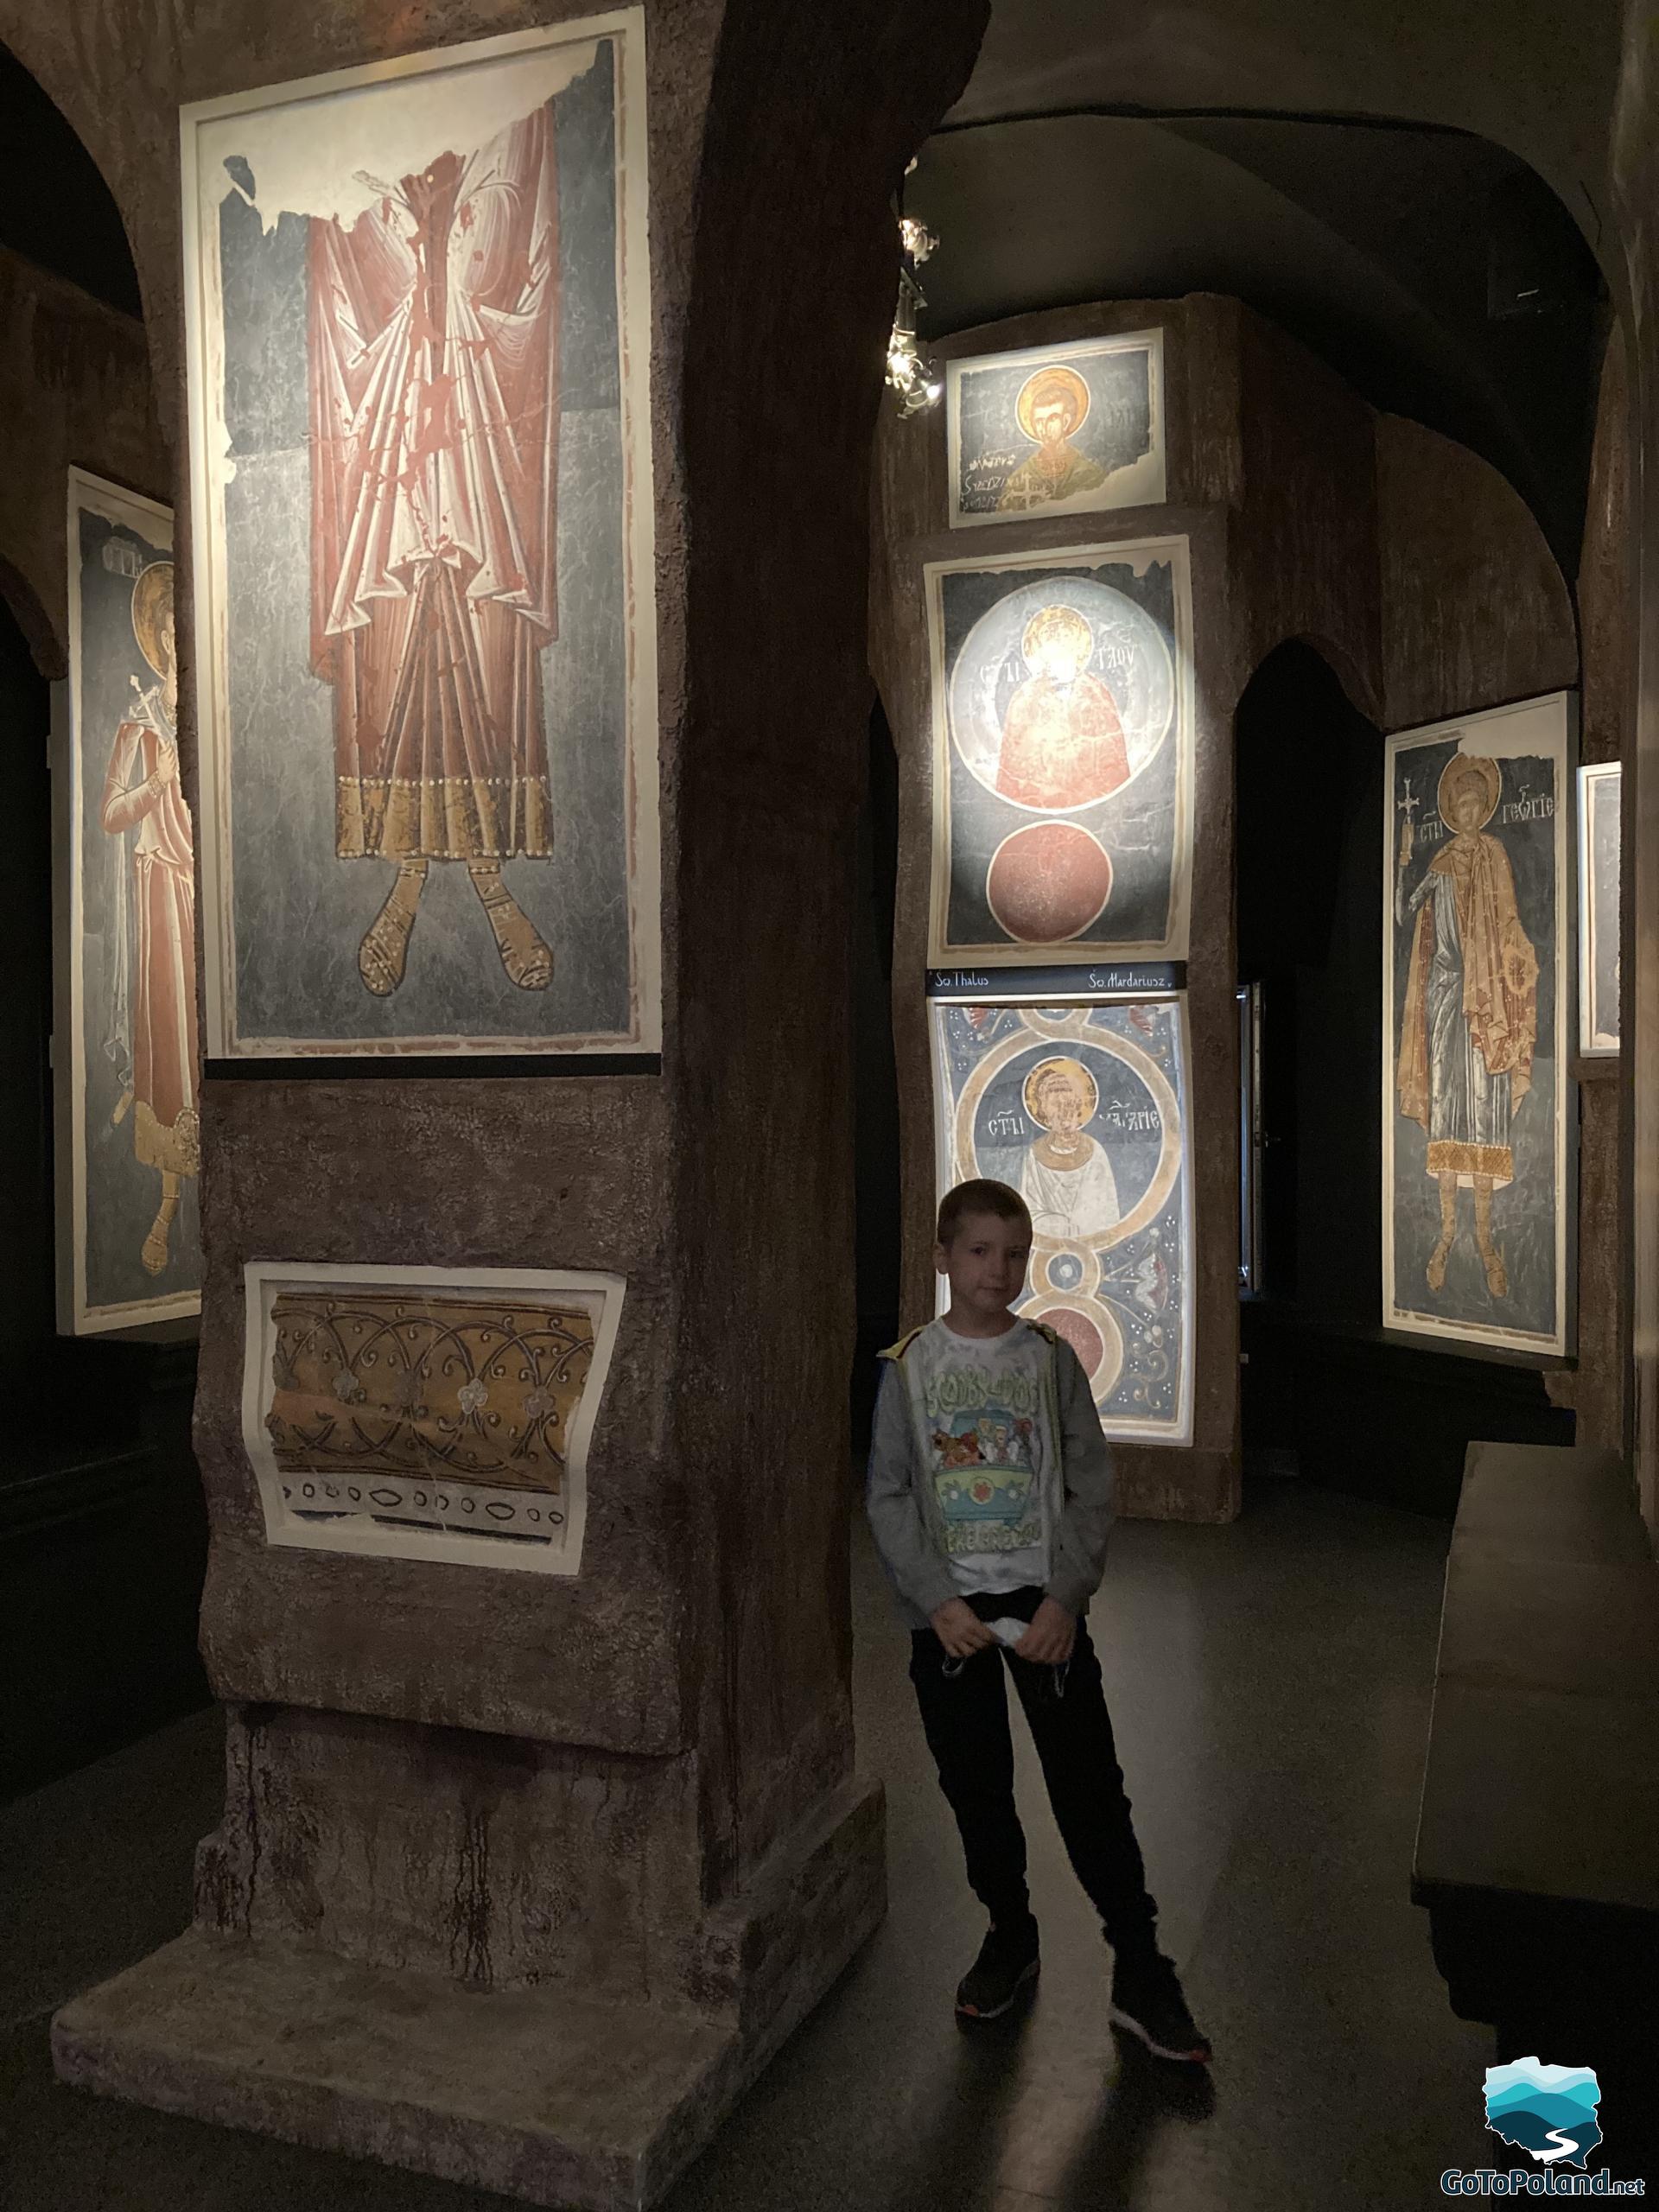 the boy is standing by the large poles on which the icons are hung